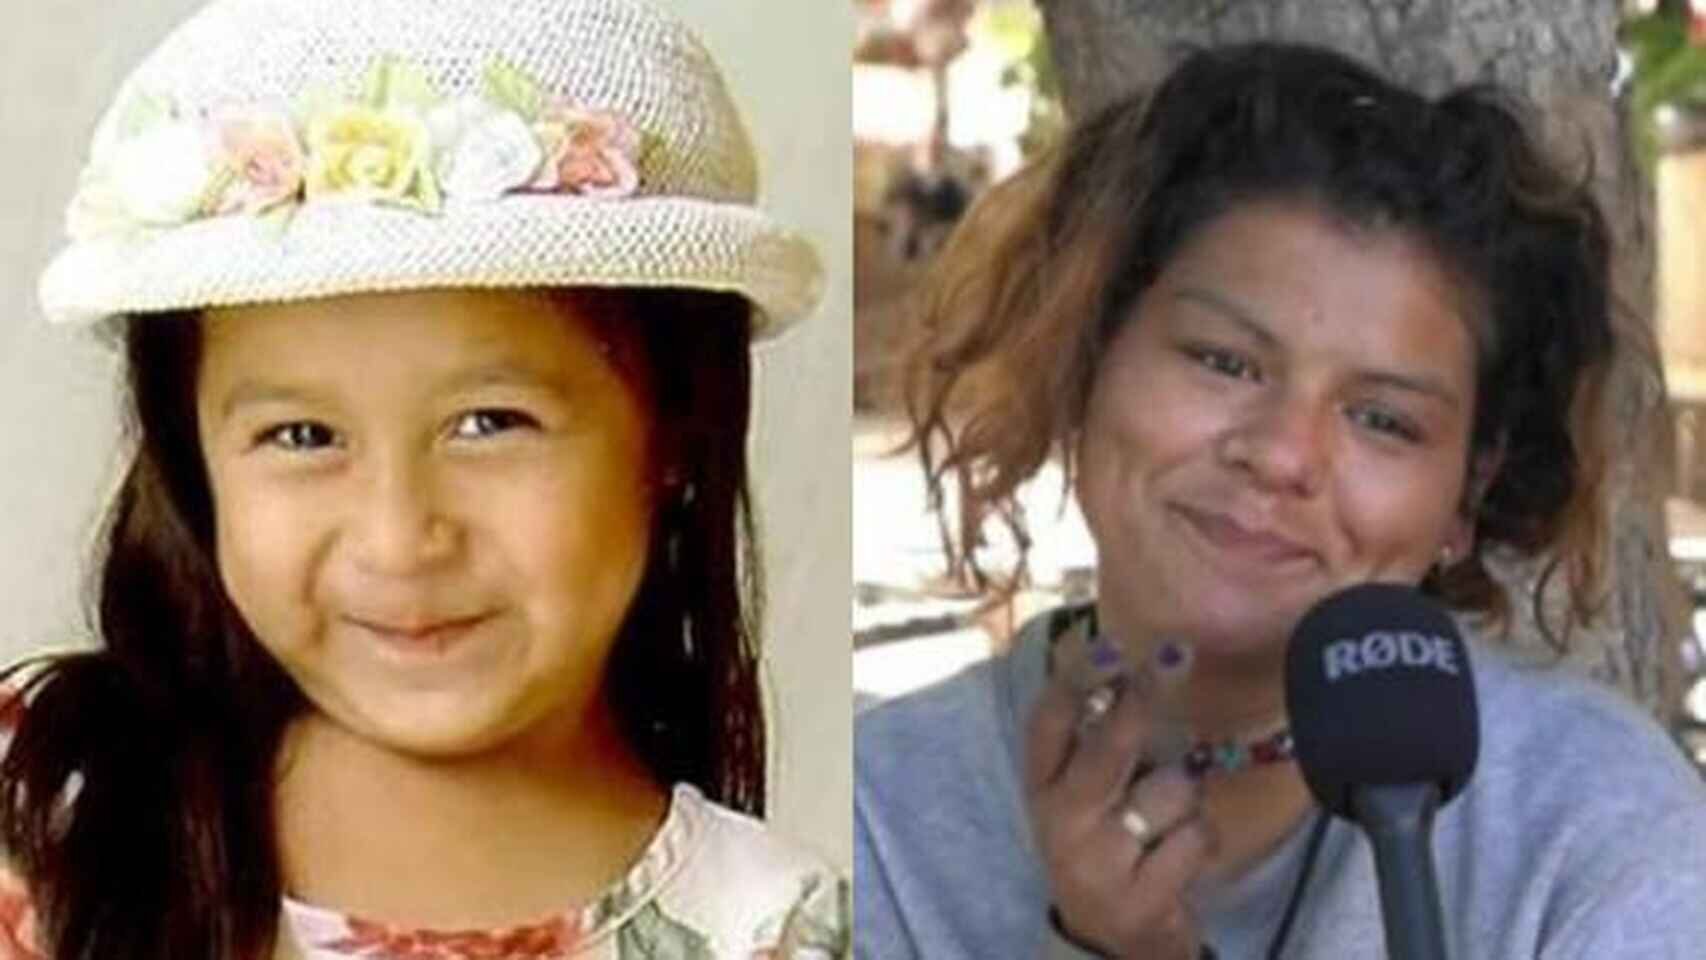 Sofia Juarez and the unidentified woman in Mexico